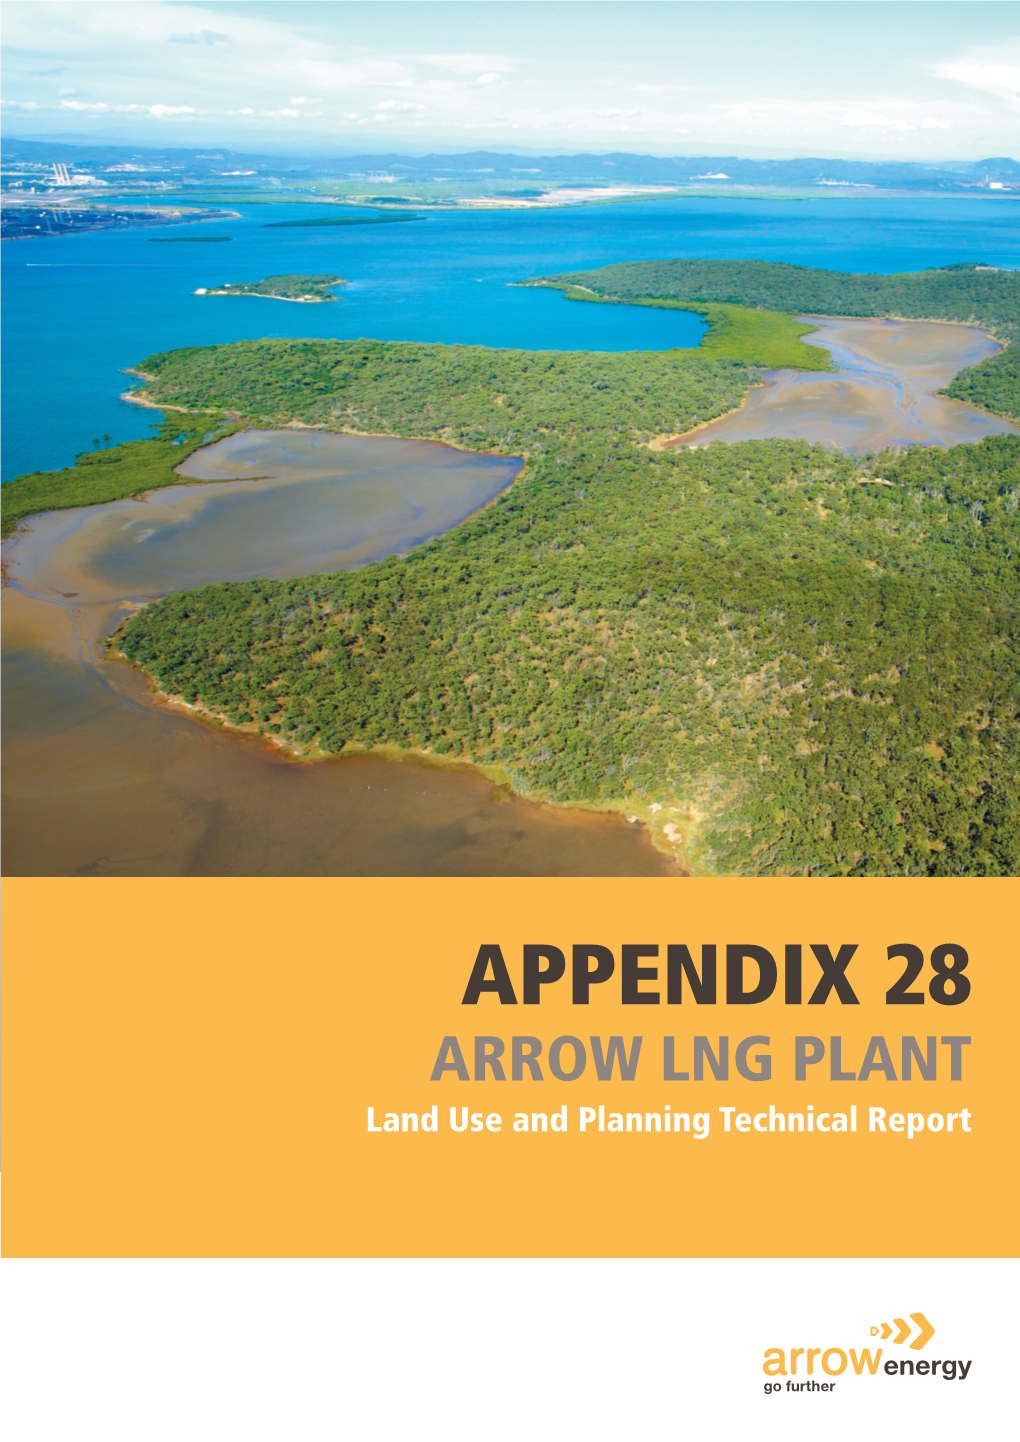 APPENDIX 28 ARROW LNG PLANT Land Use and Planning Technical Report